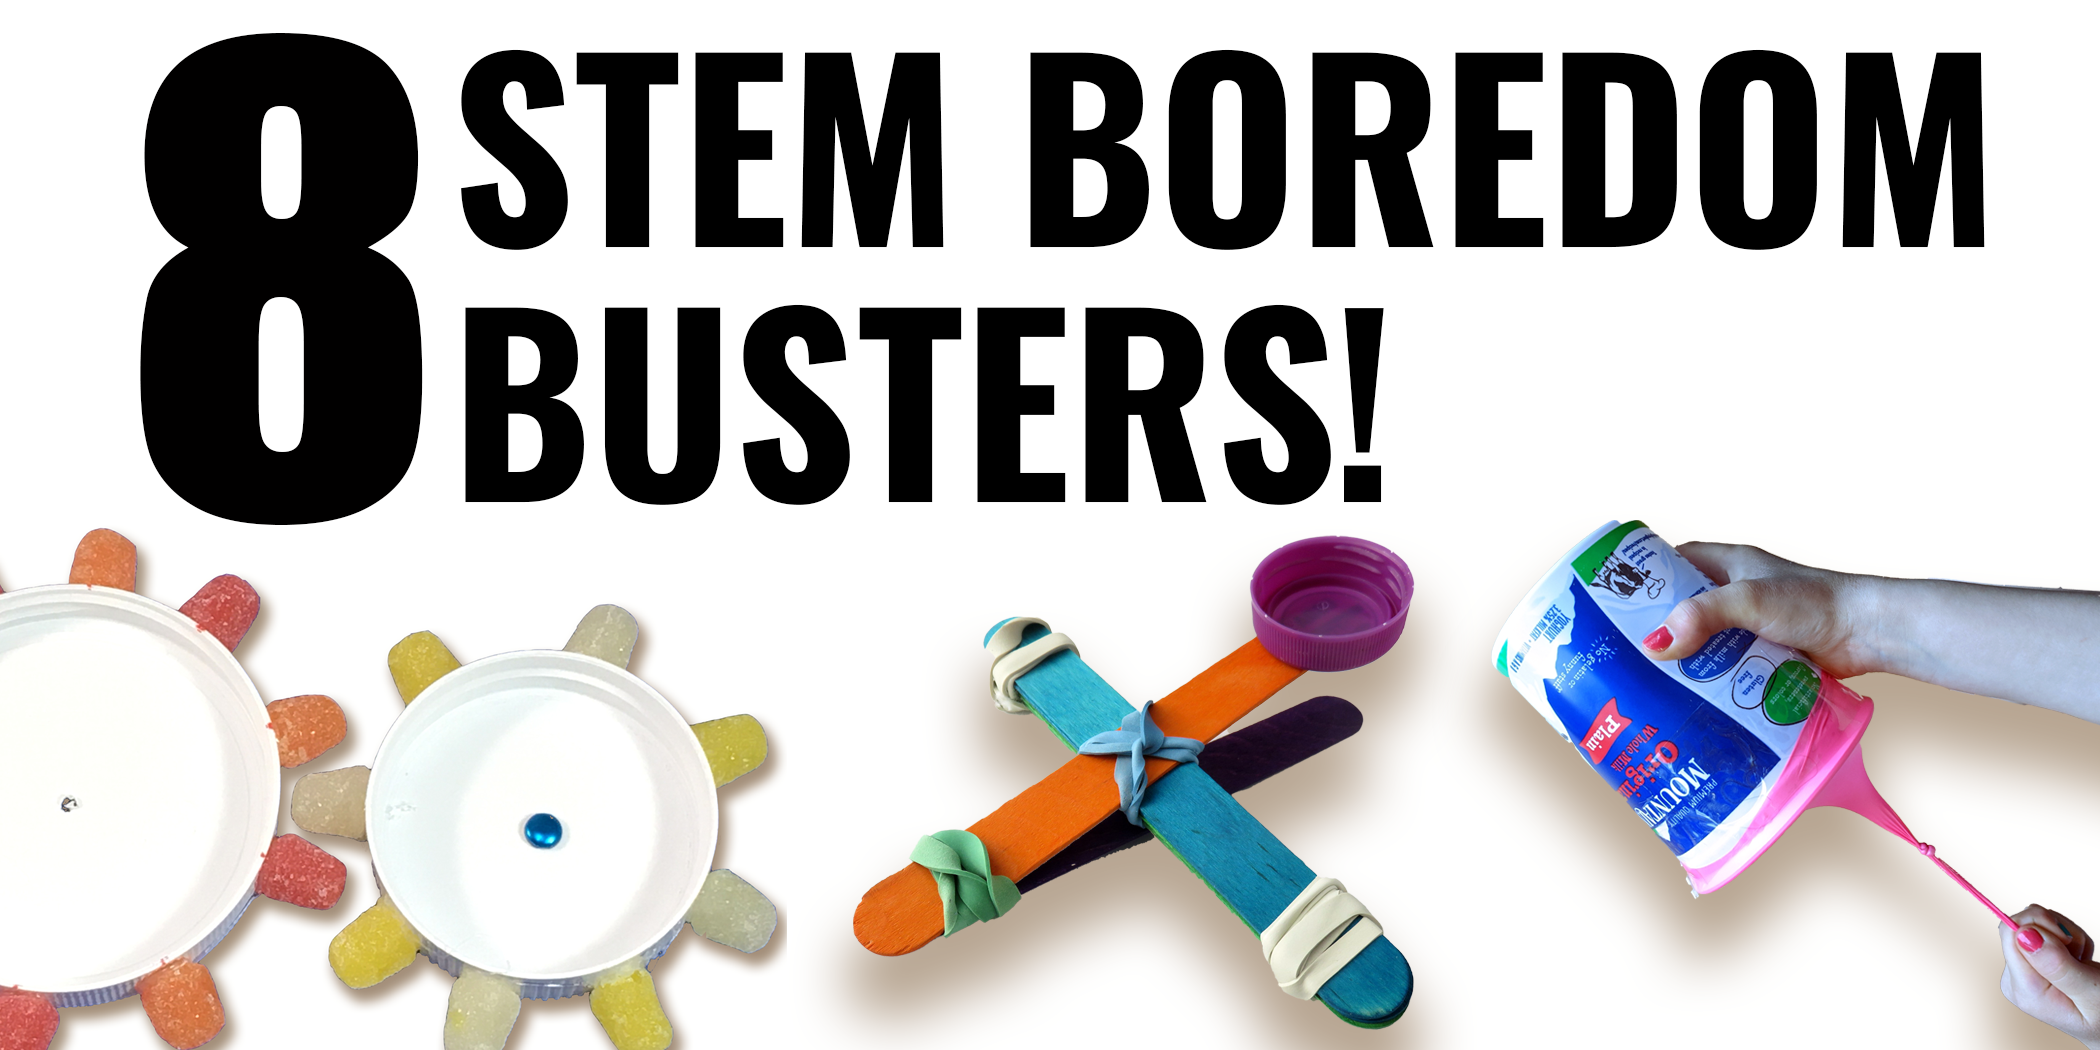 8 activities that are great for boredom busters or end-of-year STEM